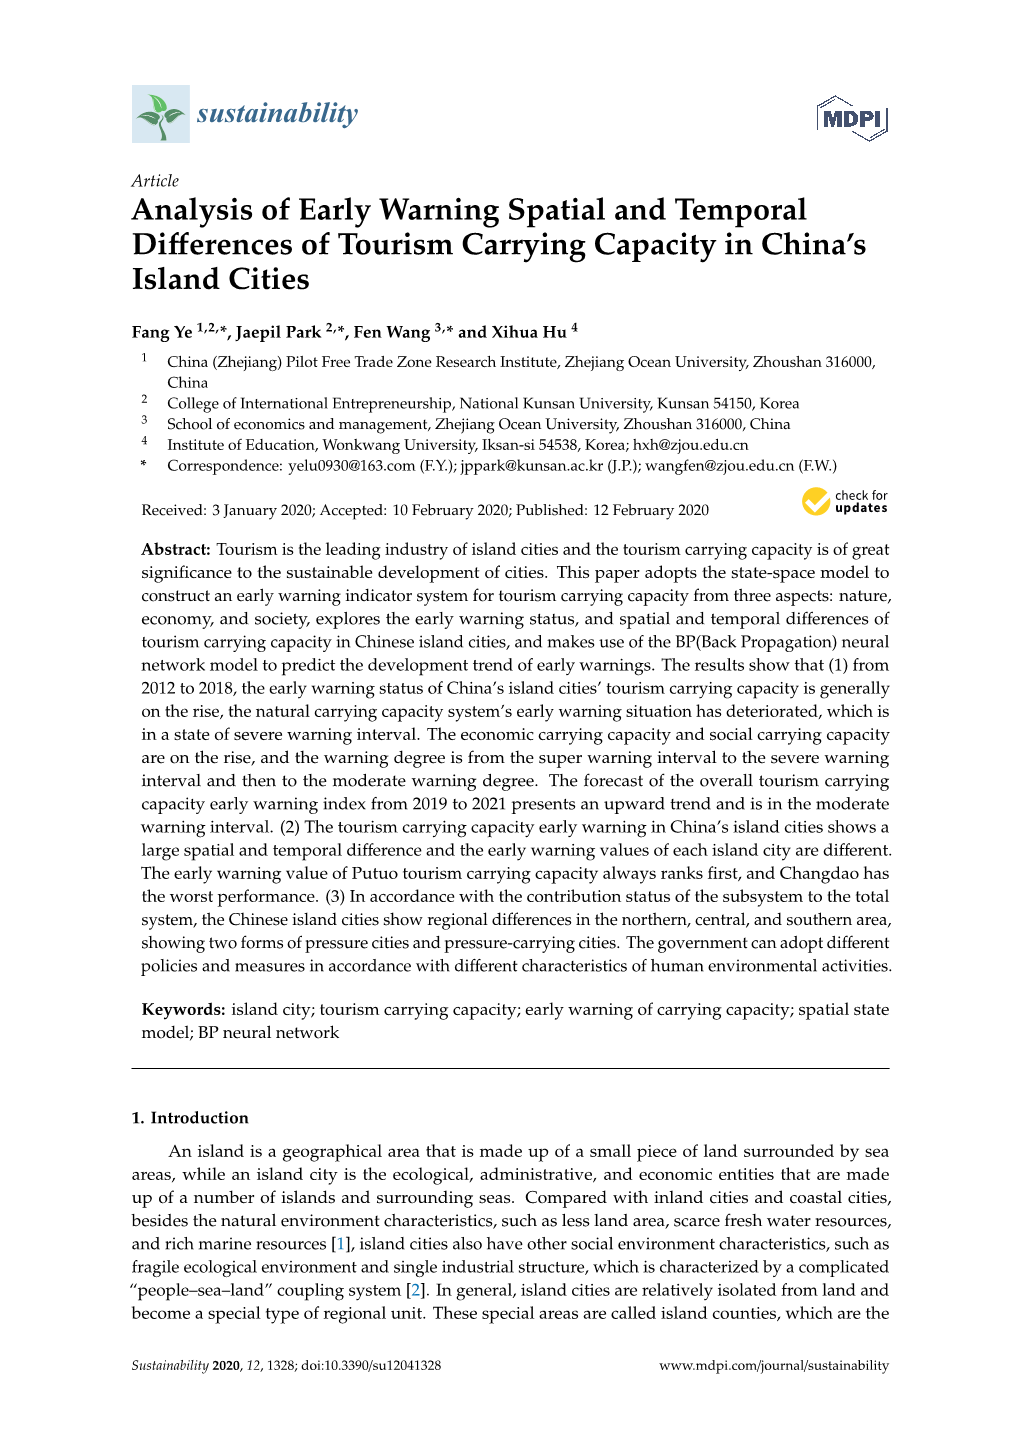 Analysis of Early Warning Spatial and Temporal Differences of Tourism